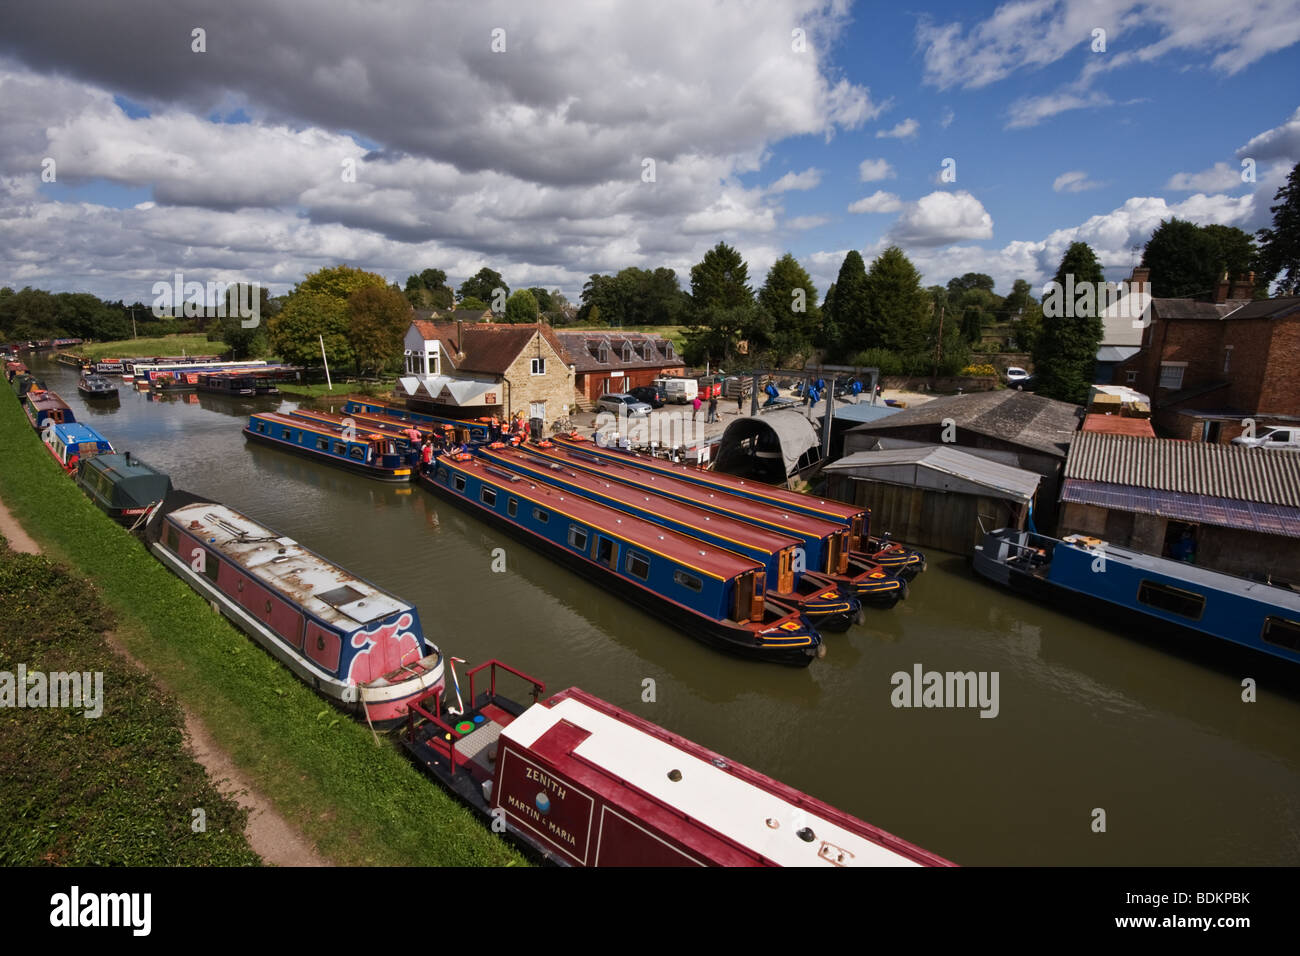 A scenic shot depicting the cherwell valley canal boat center. Stock Photo